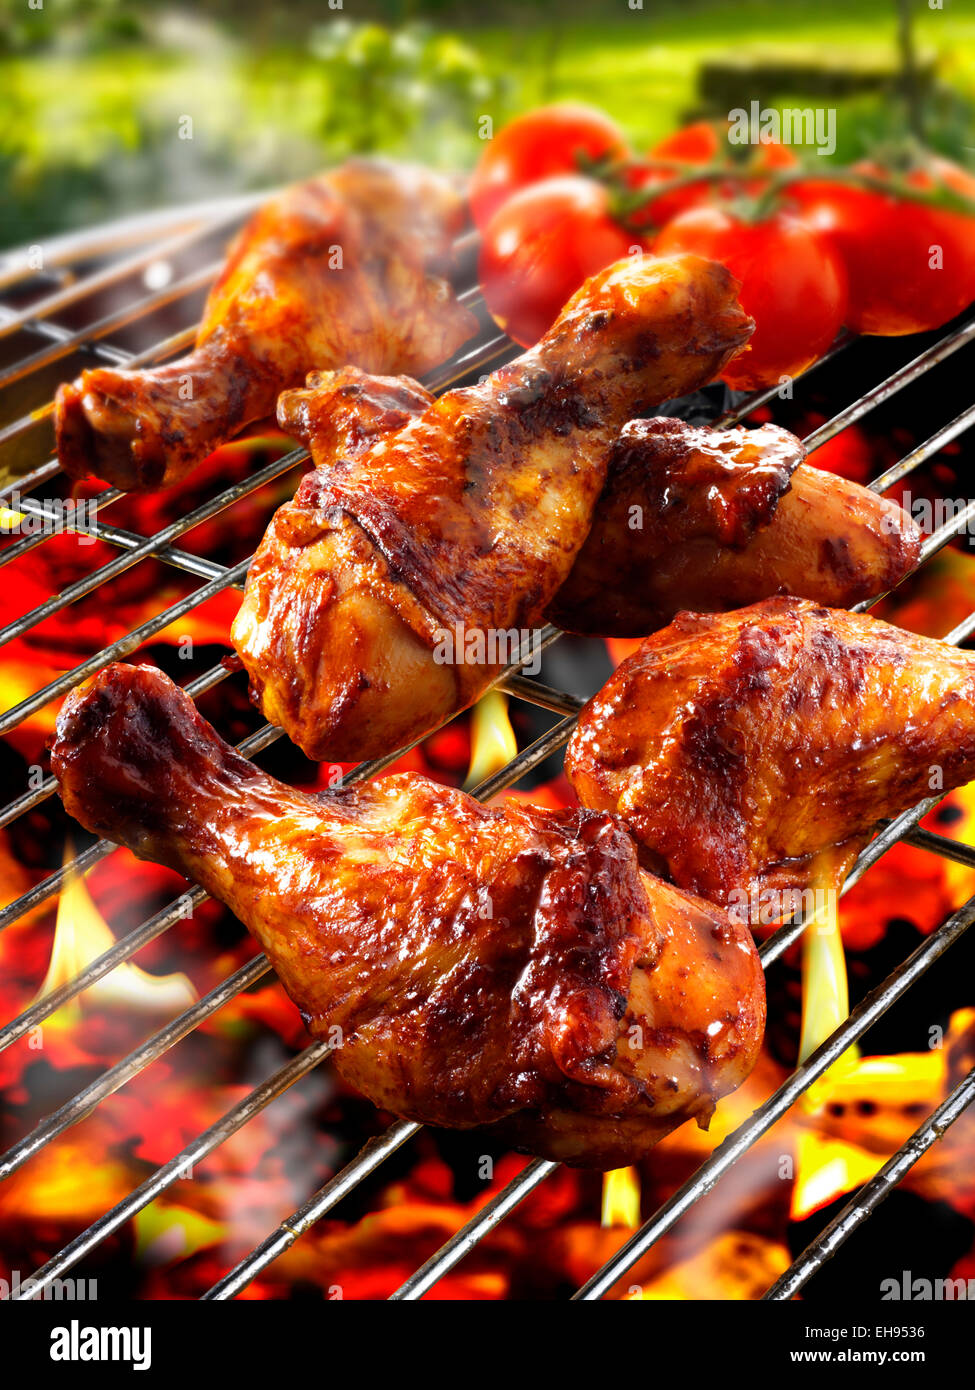 Barbecue chicken pieces cooking on a bbq over flames Stock Photo